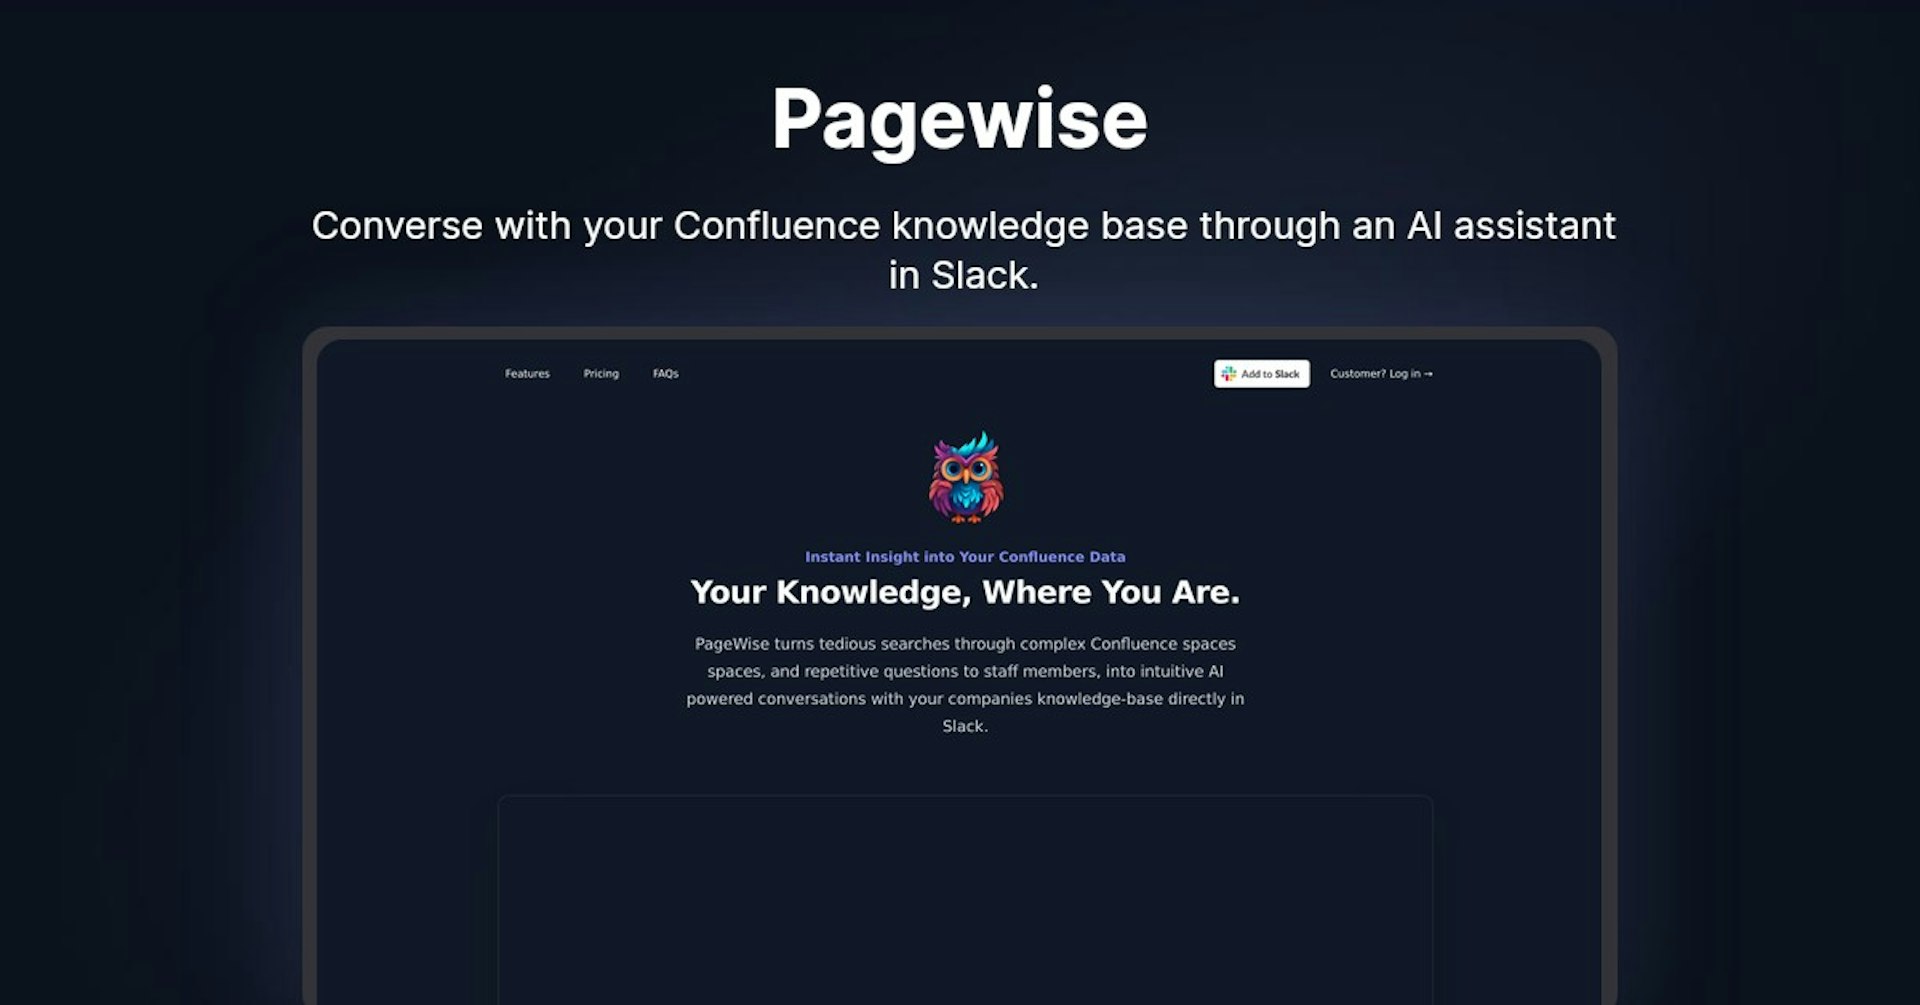 Pagewise